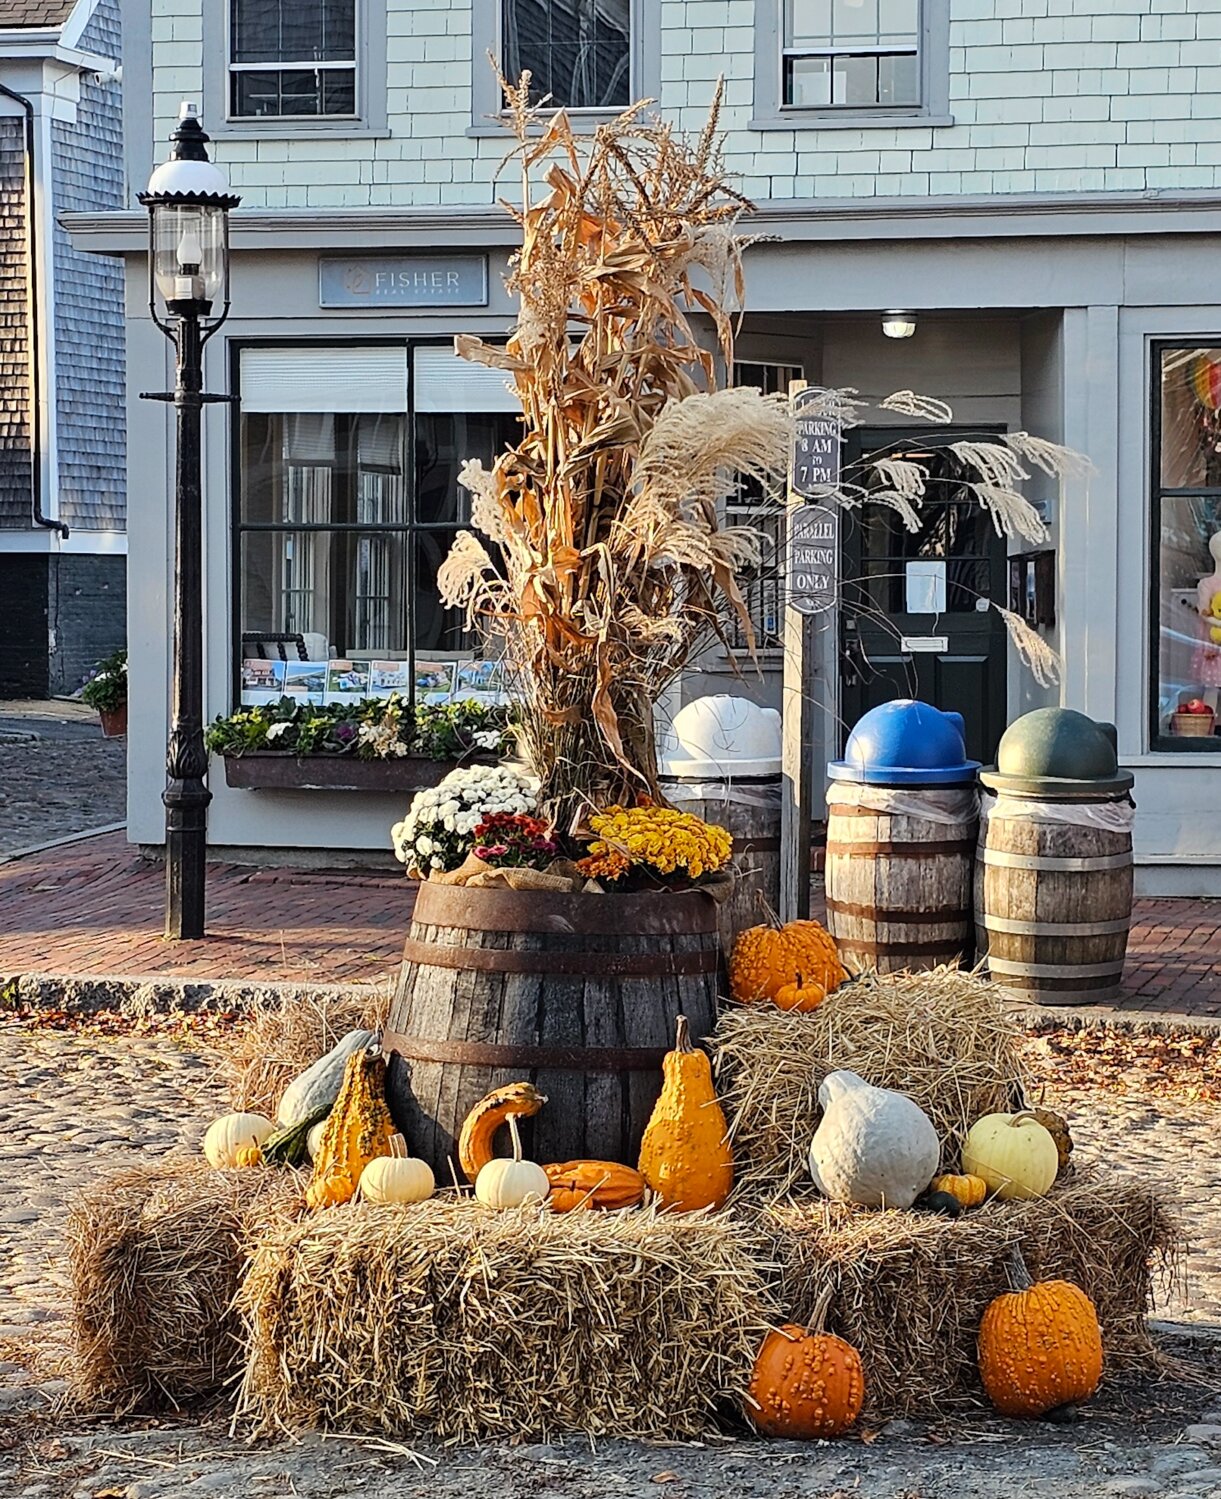 The Nantucket Garden Club and Department of Public Works have replaced the fountain at the bottom of Main Street, destroyed by a pick-up truck last week, with this seasonal display.